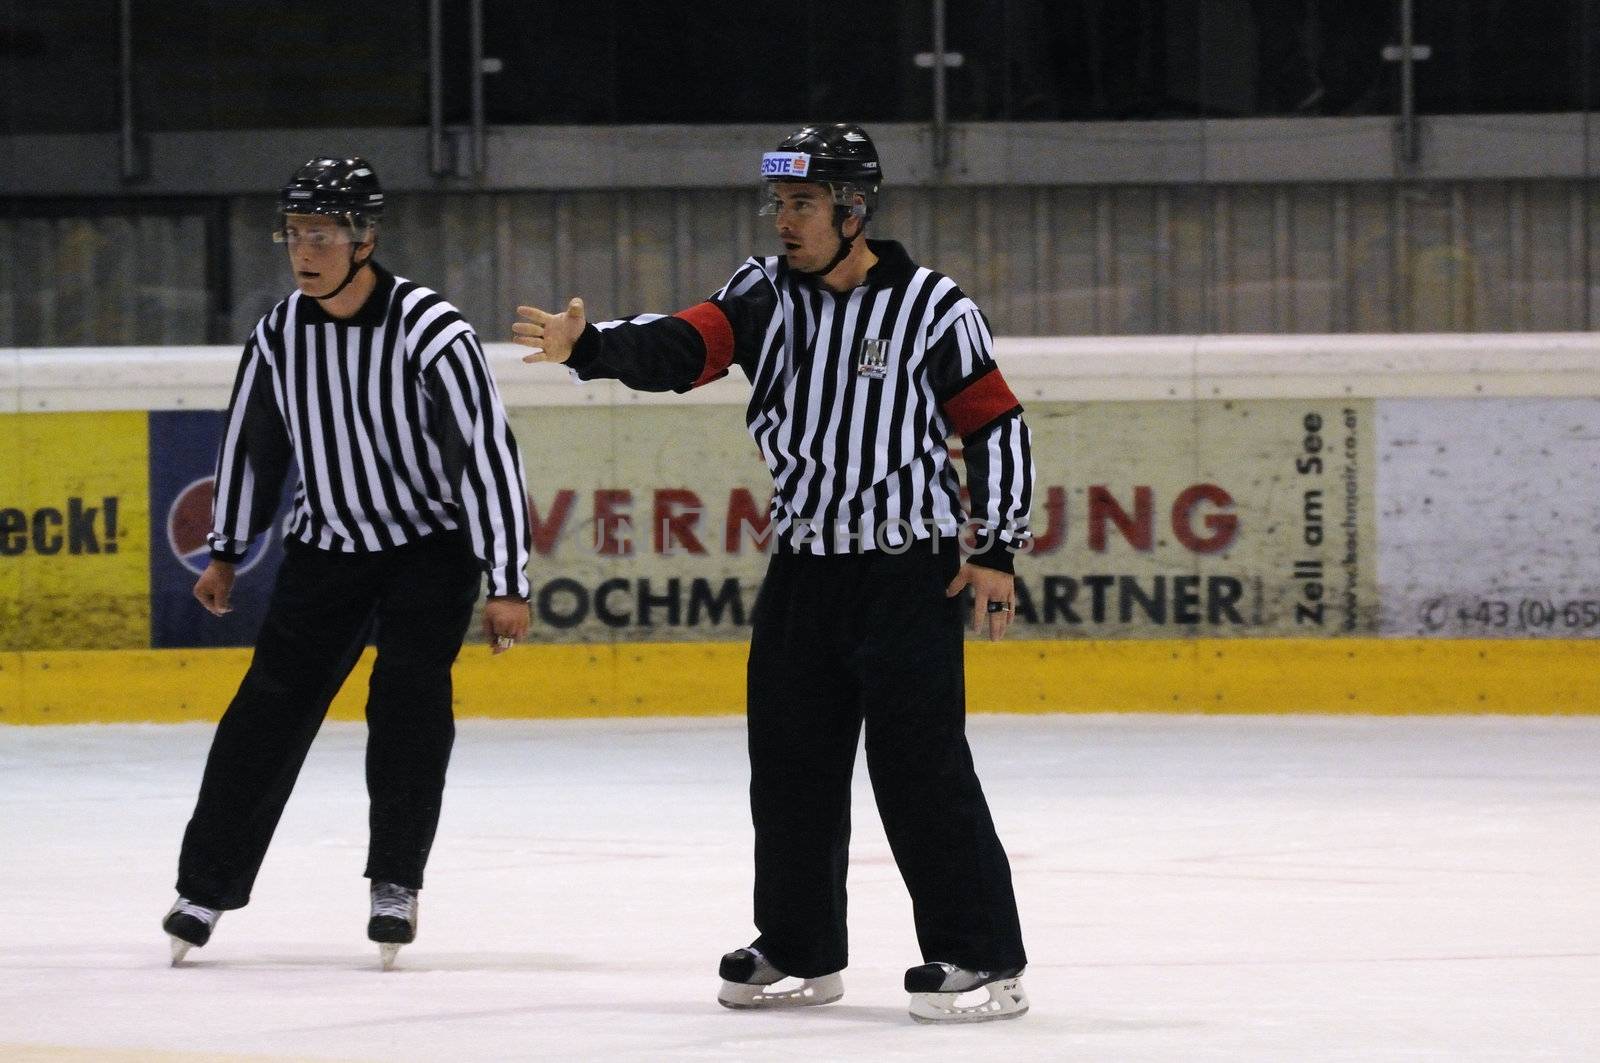 ZELL AM SEE; AUSTRIA - SEPT 24: Austrian National League. The referee gives a penalty to player. Game EK Zell am See vs EHC Lustenau (Result 1-8) on September 24, 2011 in Zell am See.